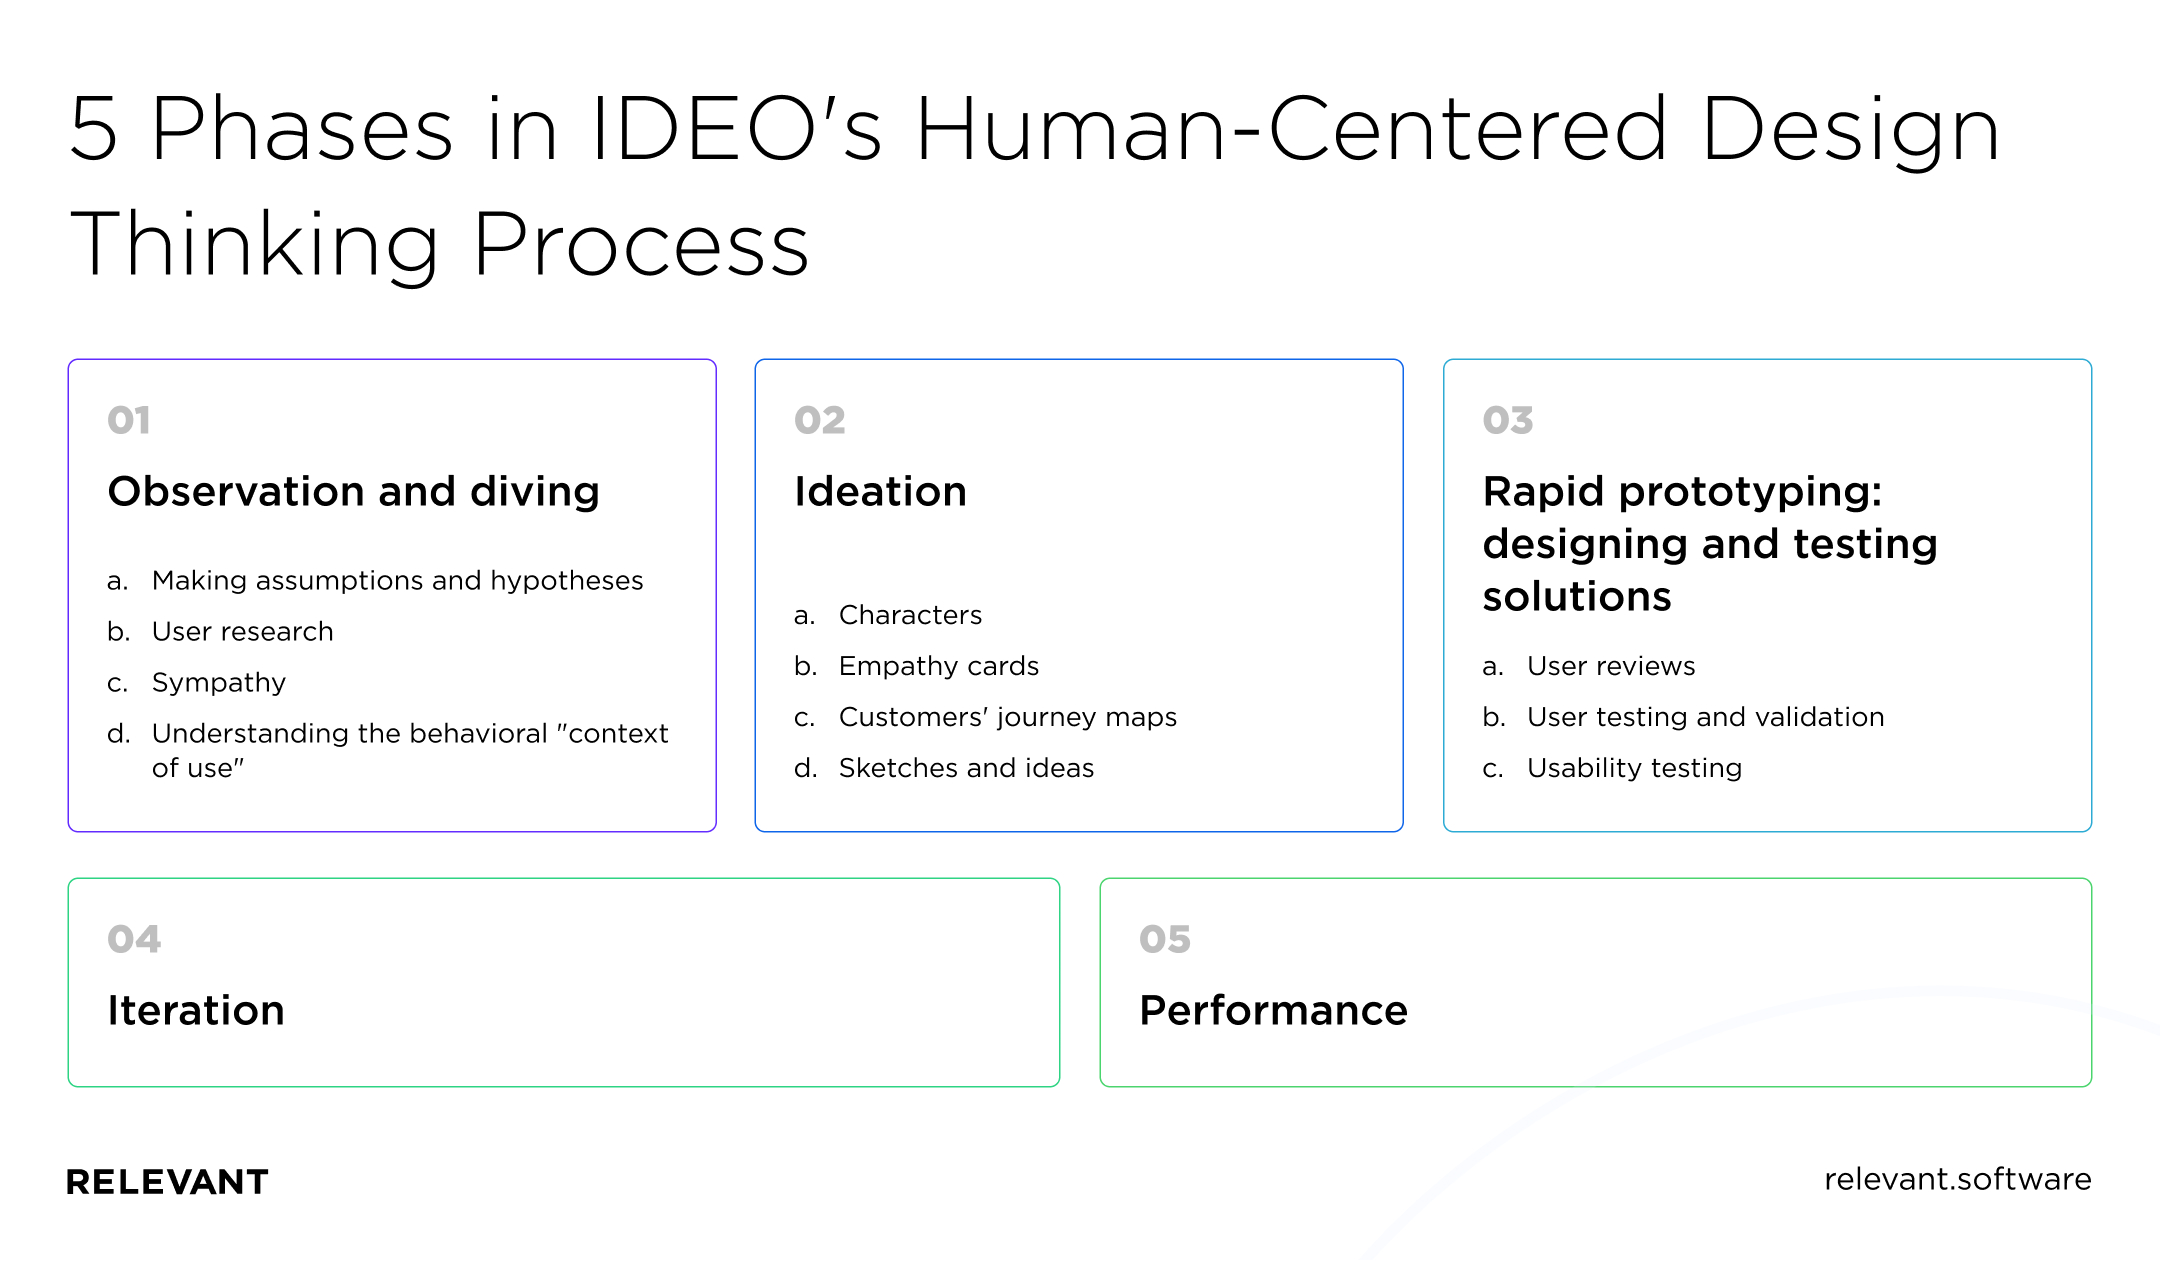 5 Phases in IDEO's Human-Centered Design Thinking Process